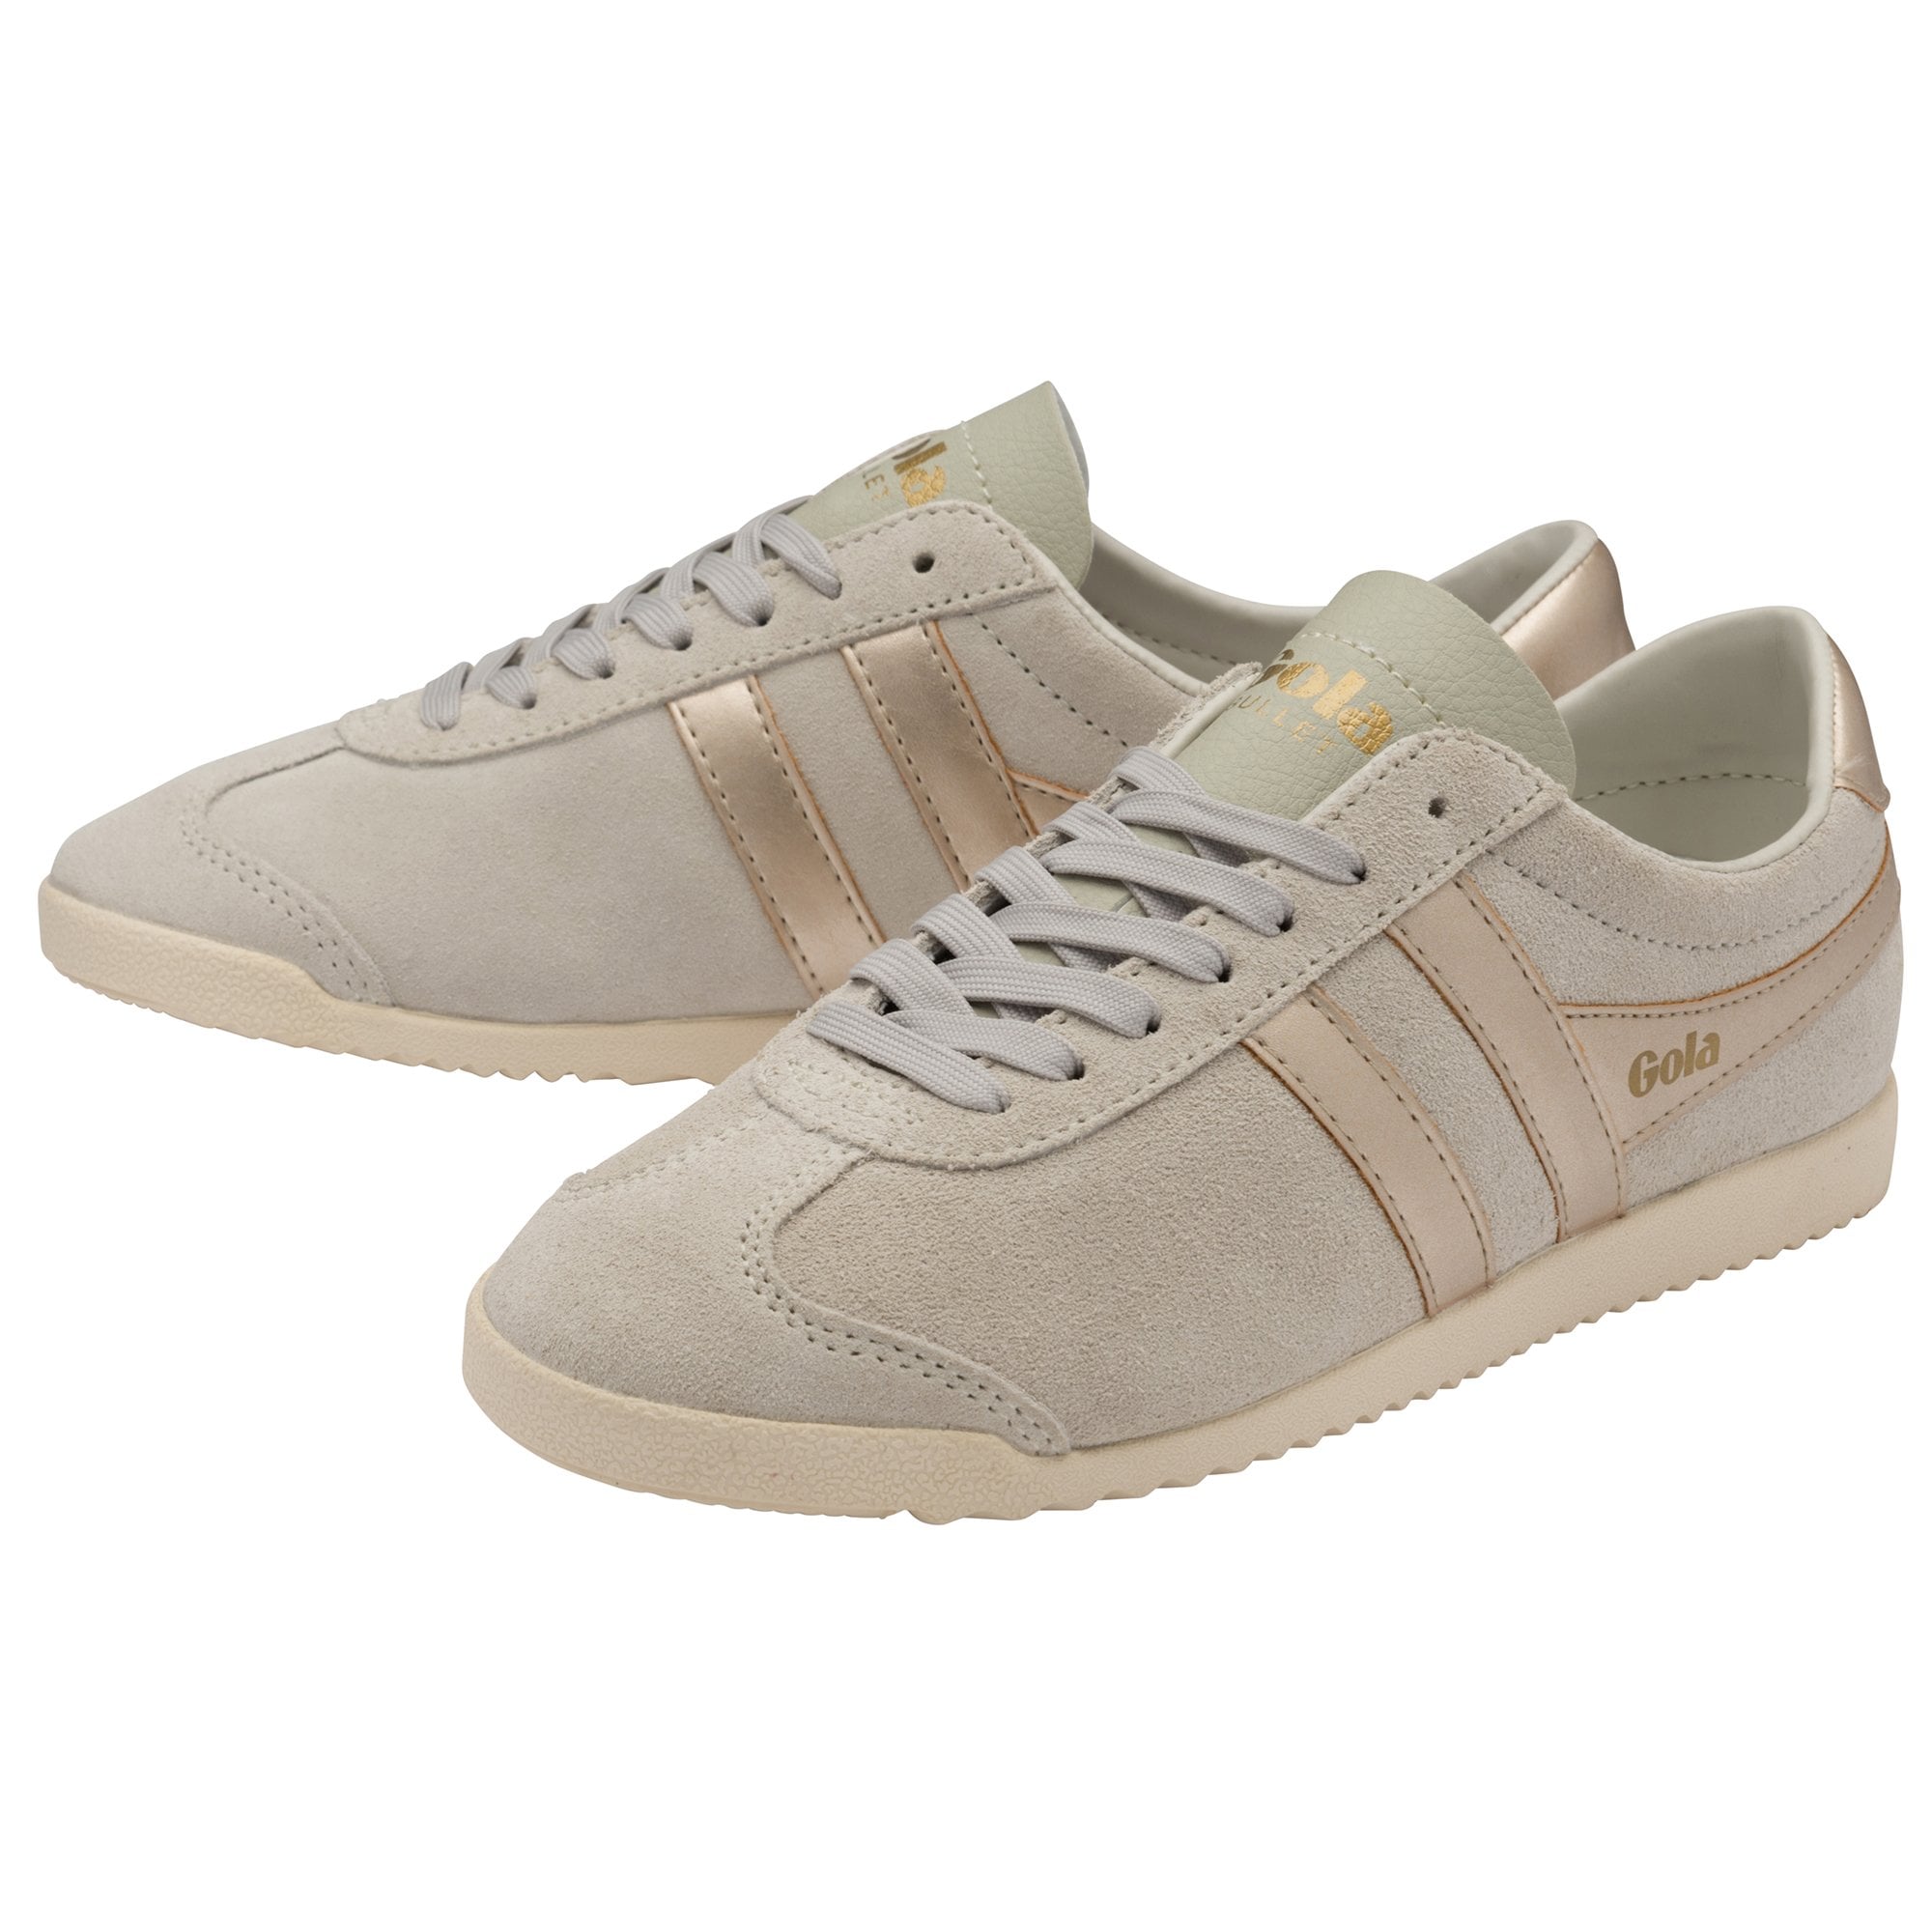 Gola Womens Bullet Pearl Classics Suede Trainers Shoes - Off White 2951